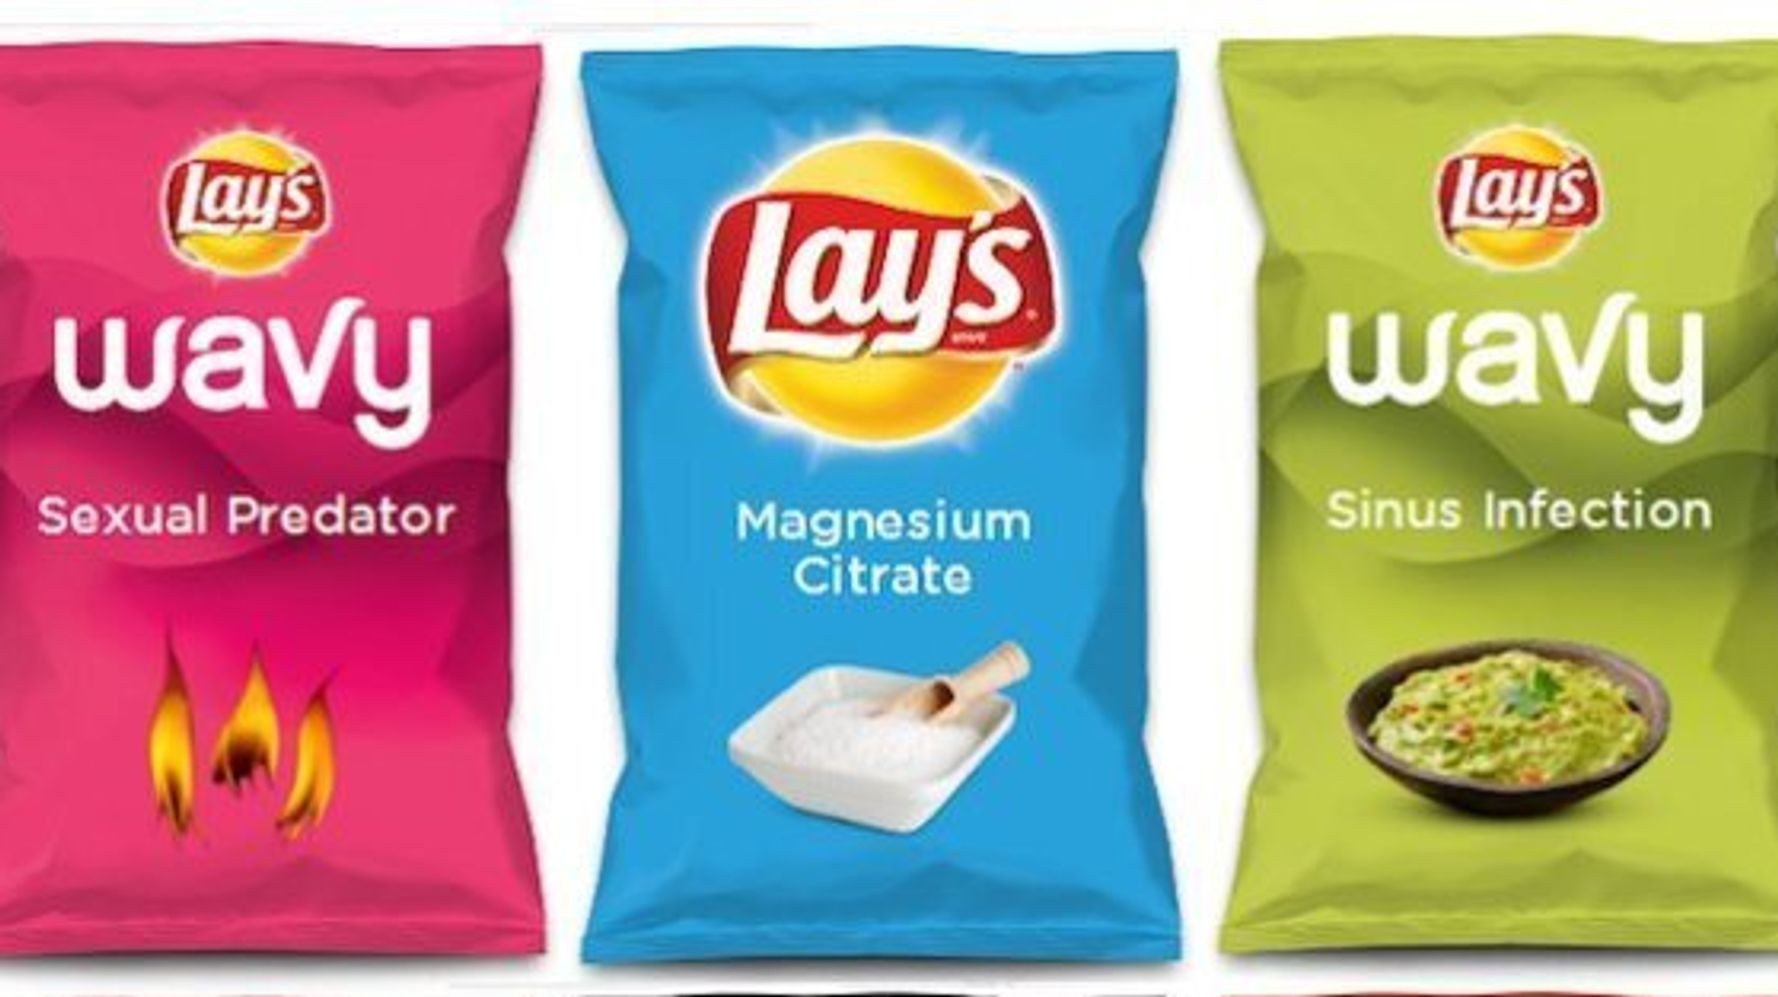 Lays 'Do Us A Flavor' Campaign Comes Up With Brilliant, Gross Ideas  (PHOTOS) | HuffPost Life